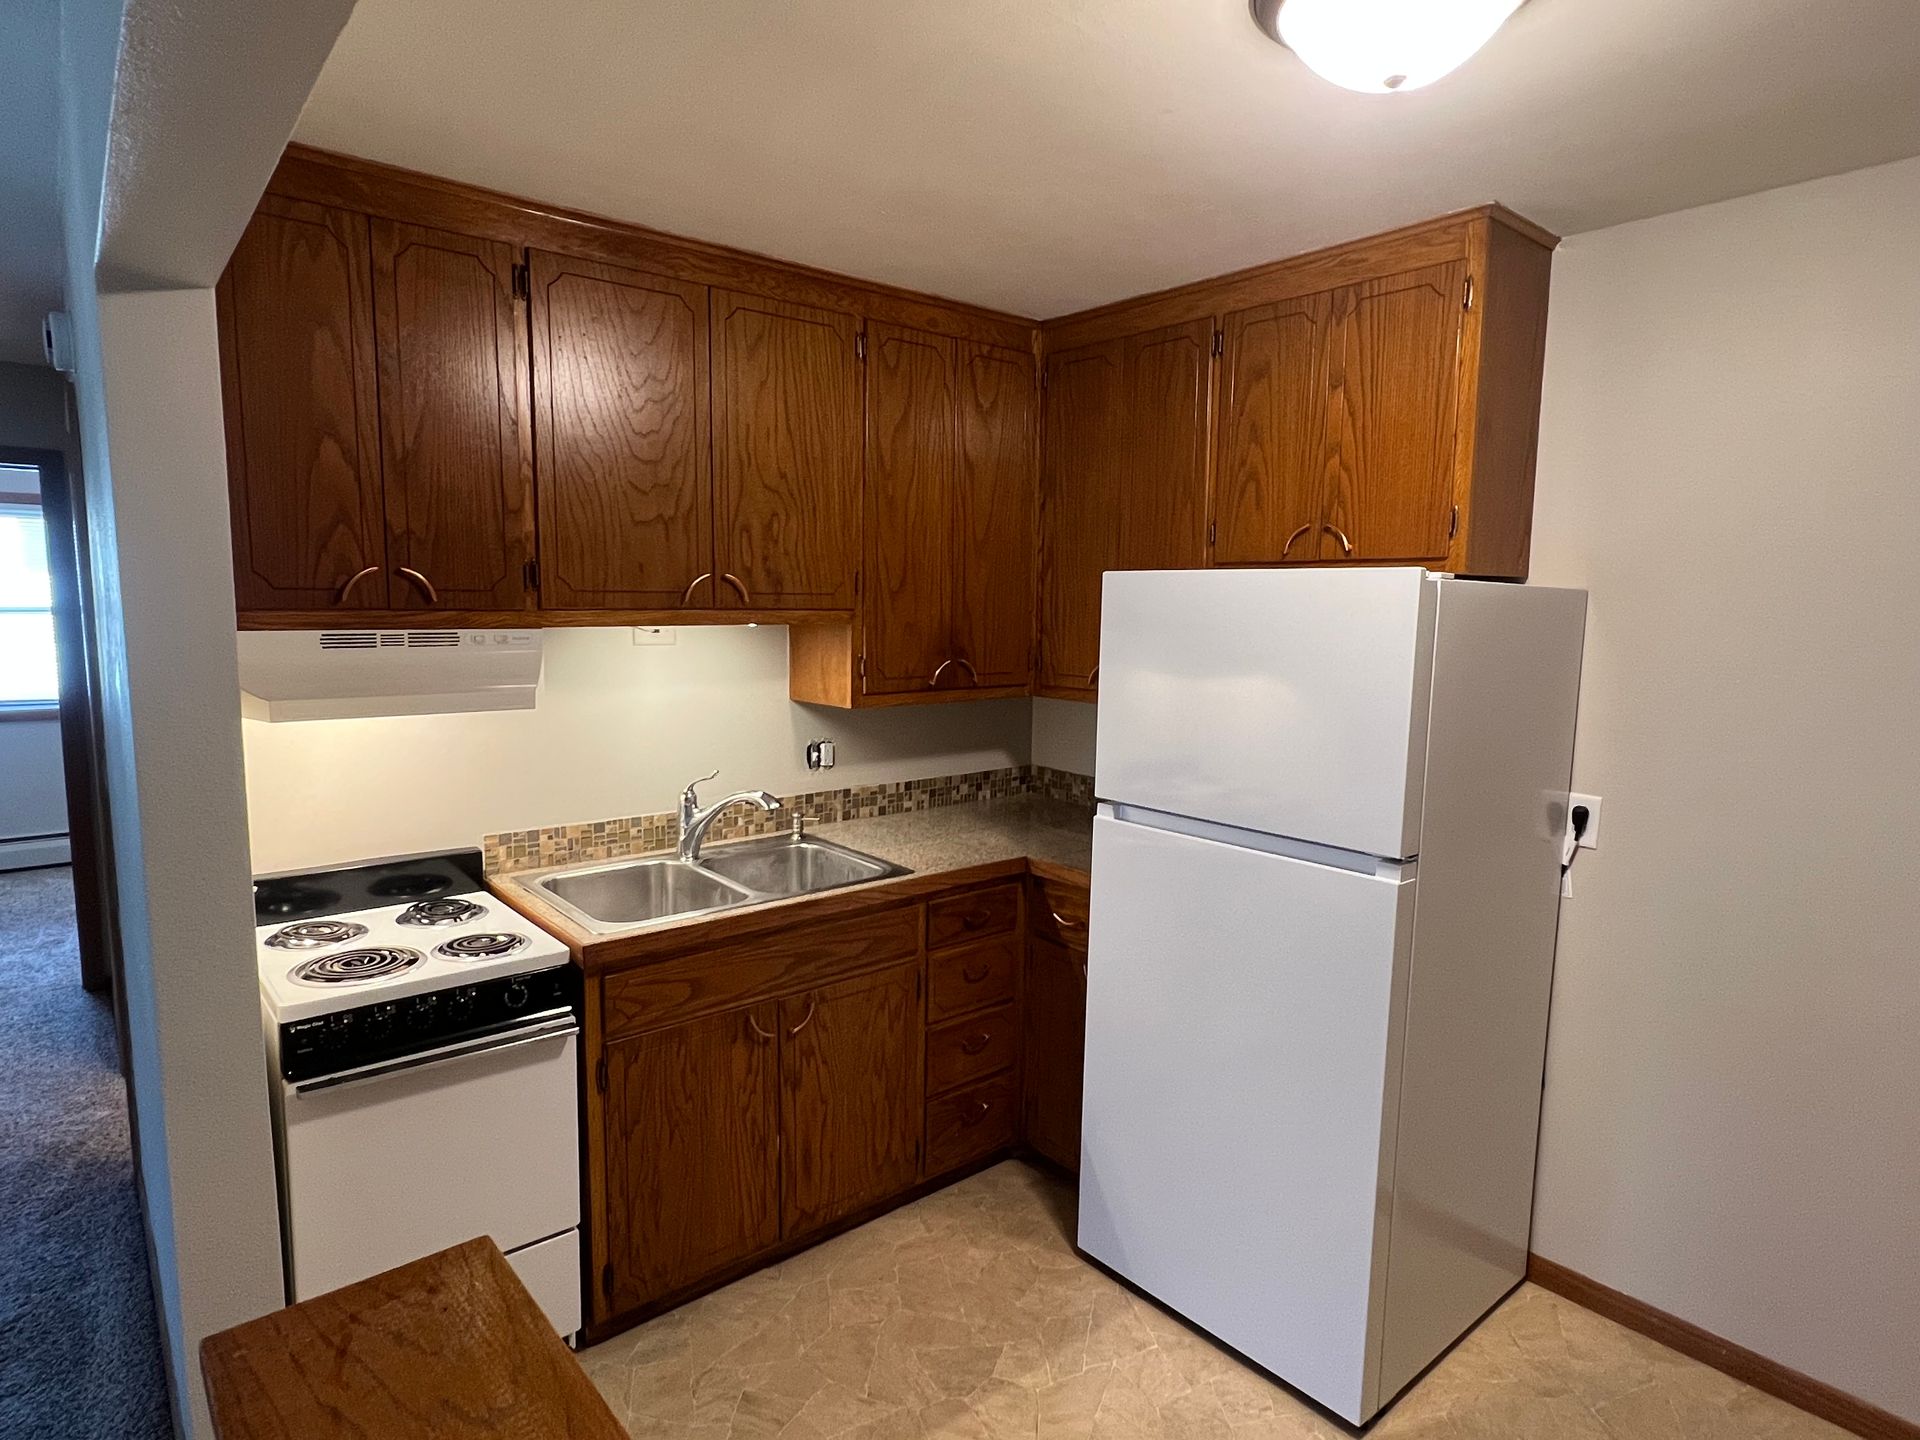 A kitchen with wooden cabinets and a white refrigerator